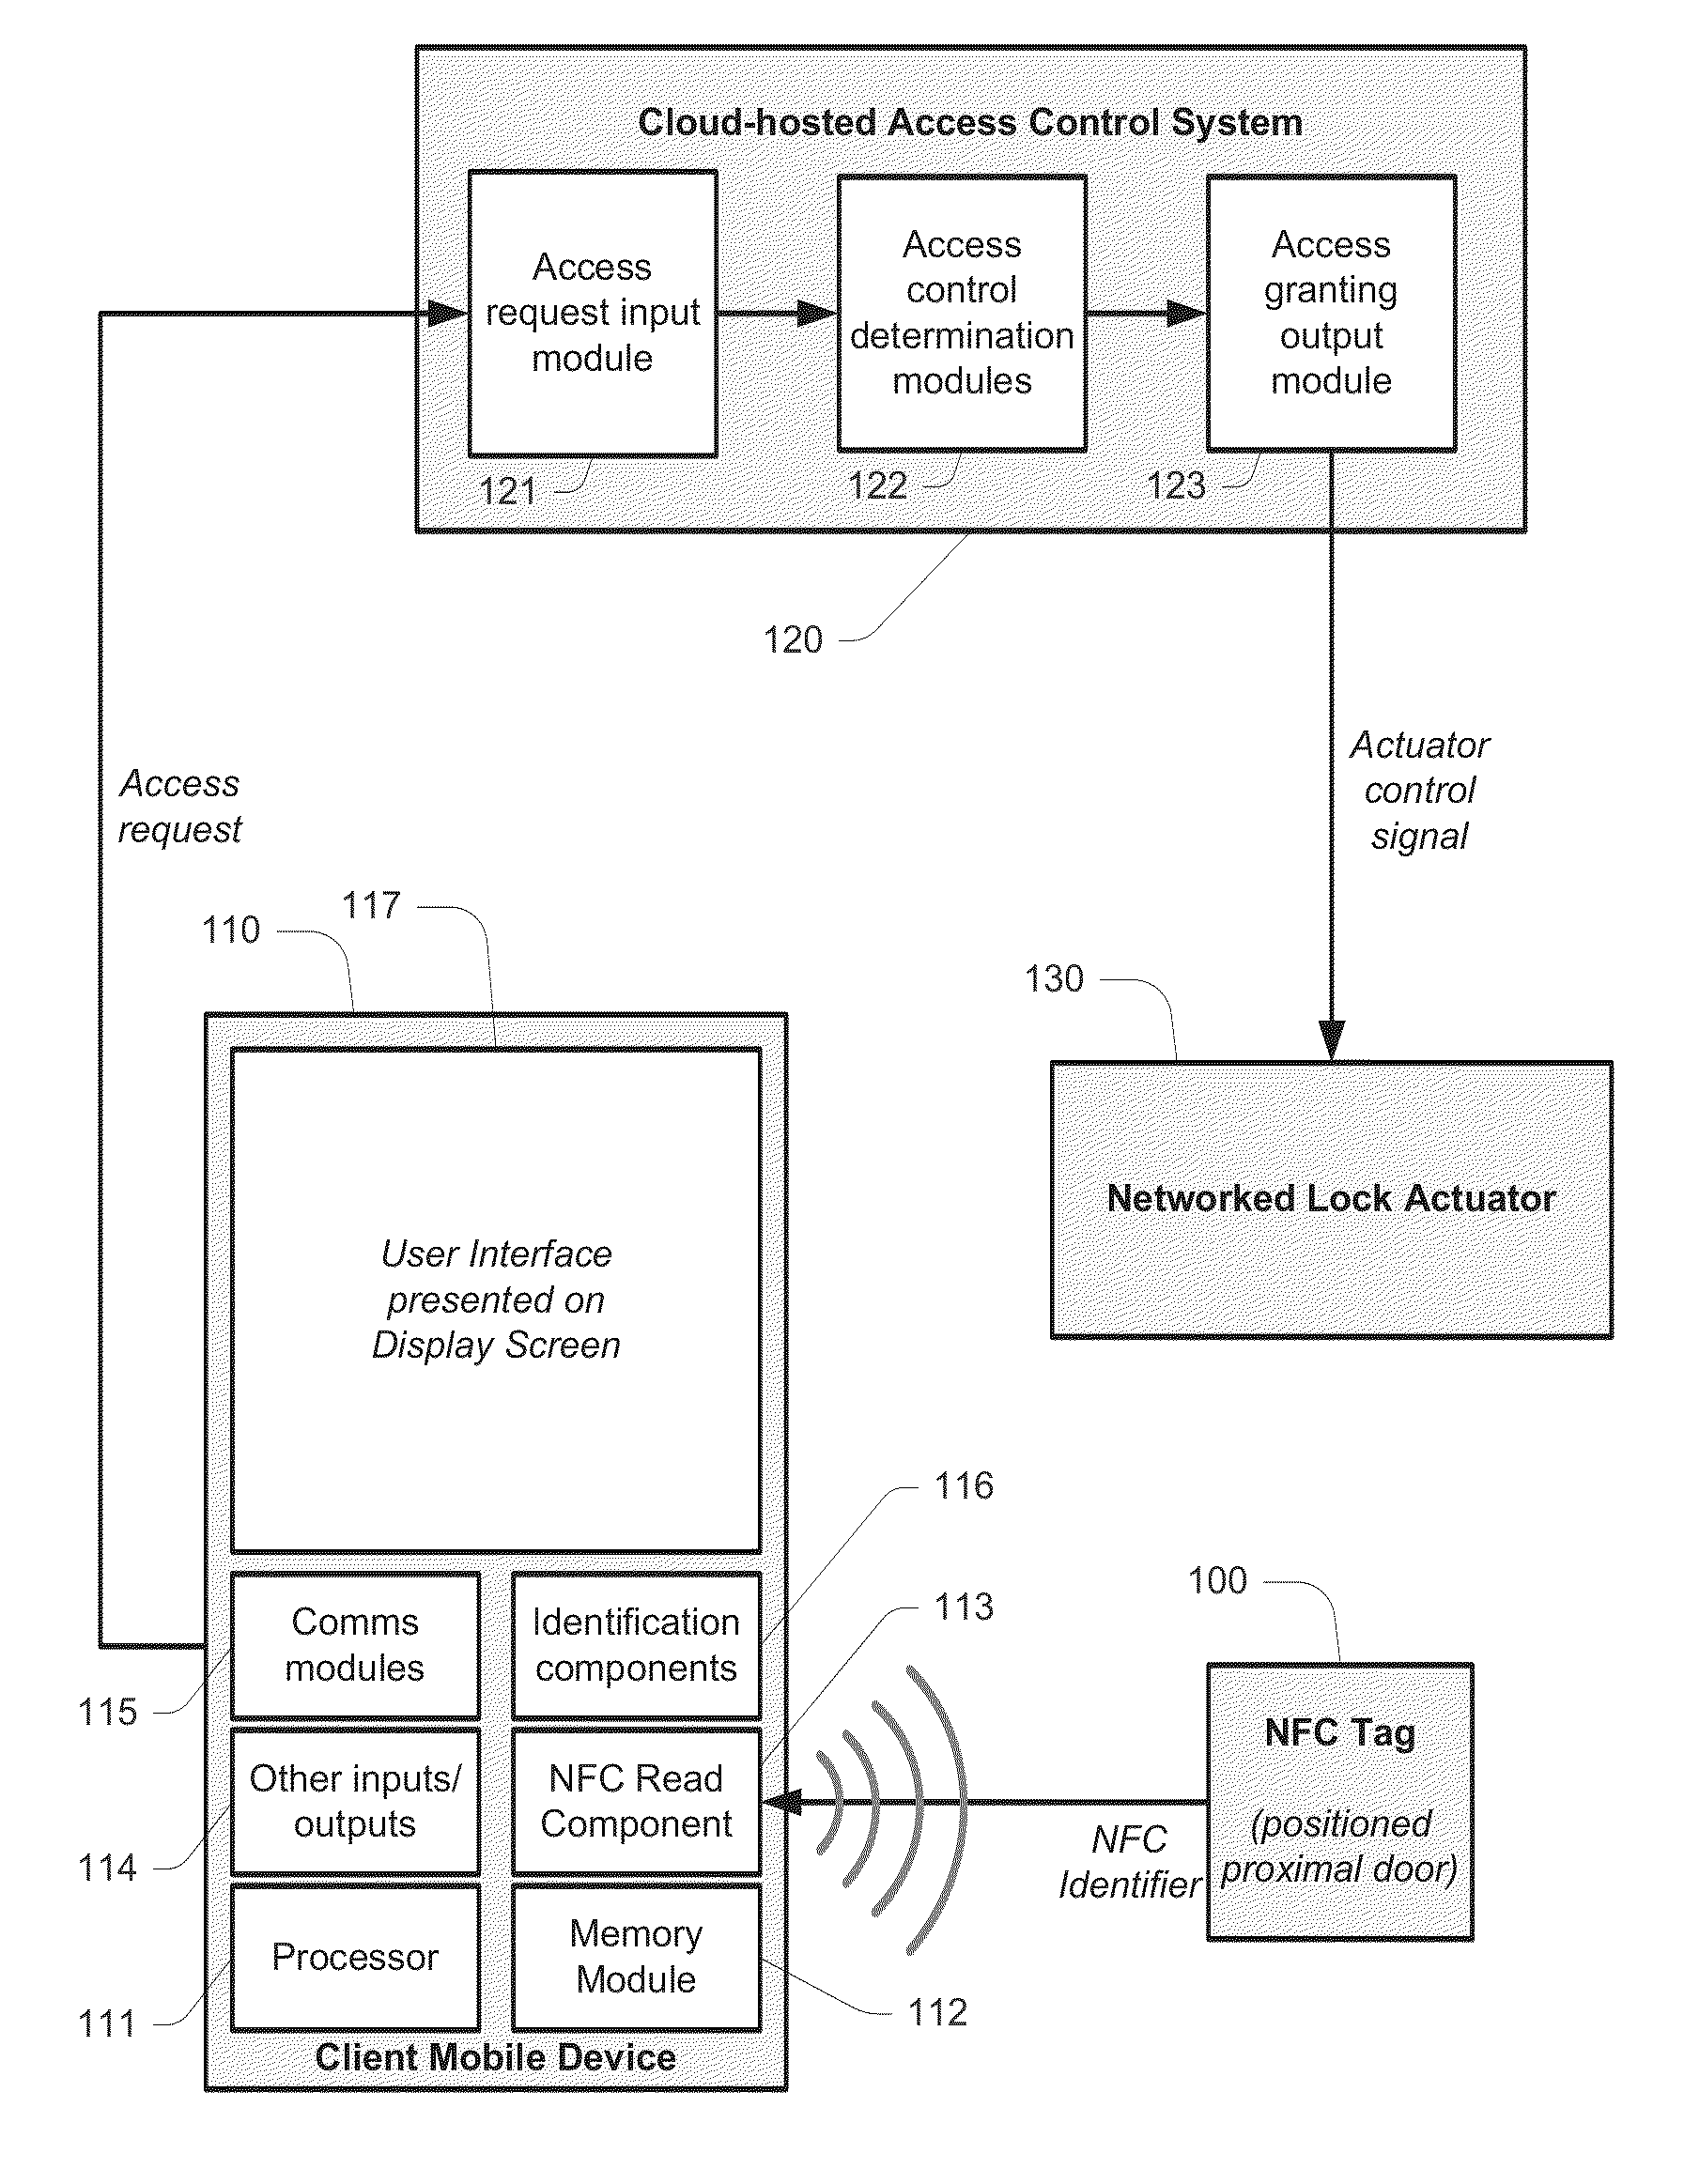 Systems and methods for enabling access control via mobile devices